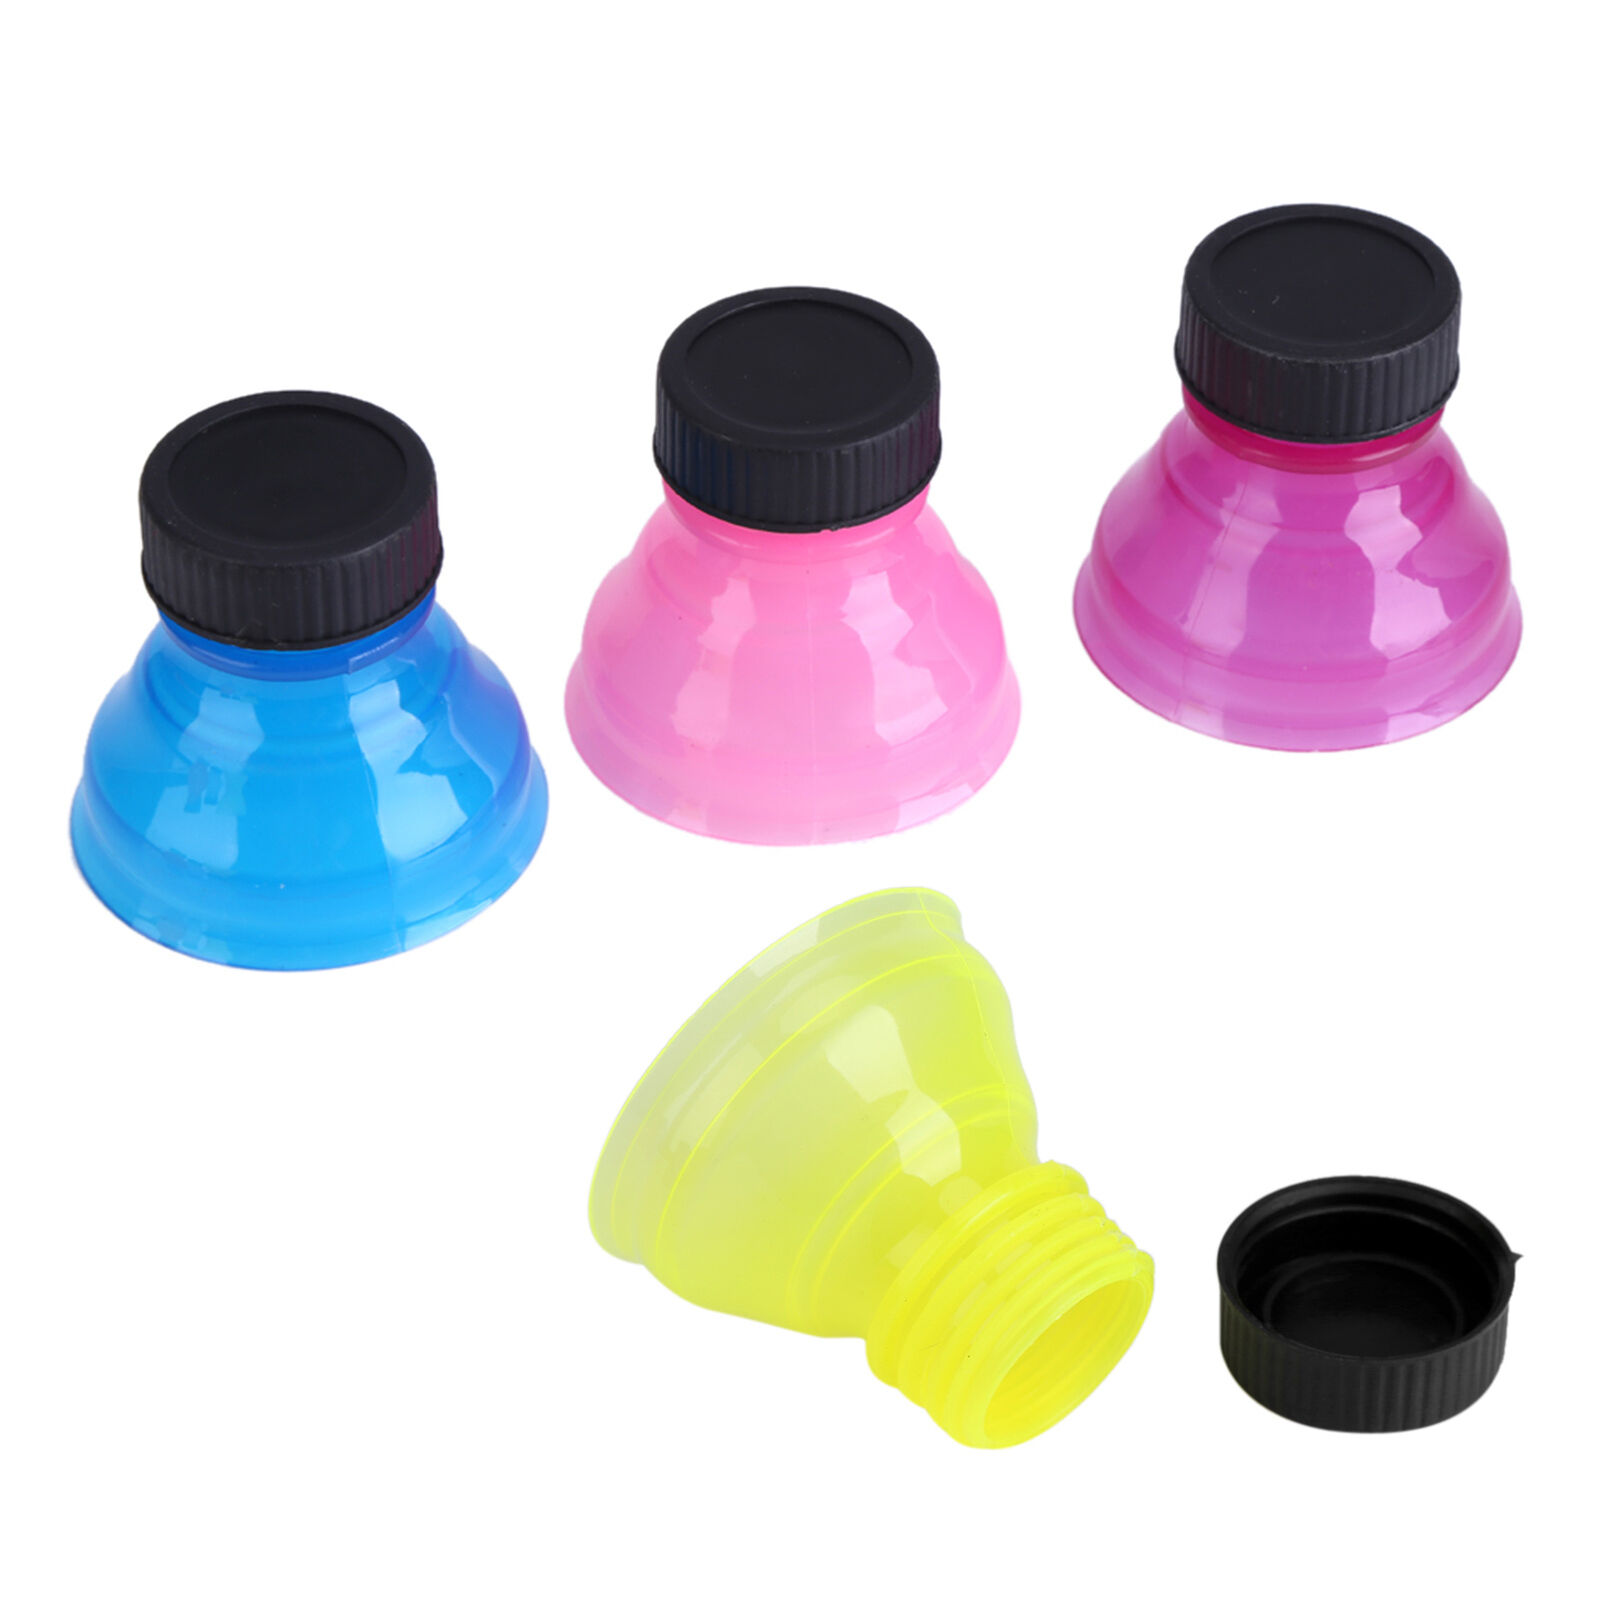 6Pcs Bottle Caps Reusable Bottle Caps For Cool Soda Drink Drink Unbranded Does not apply - фотография #10